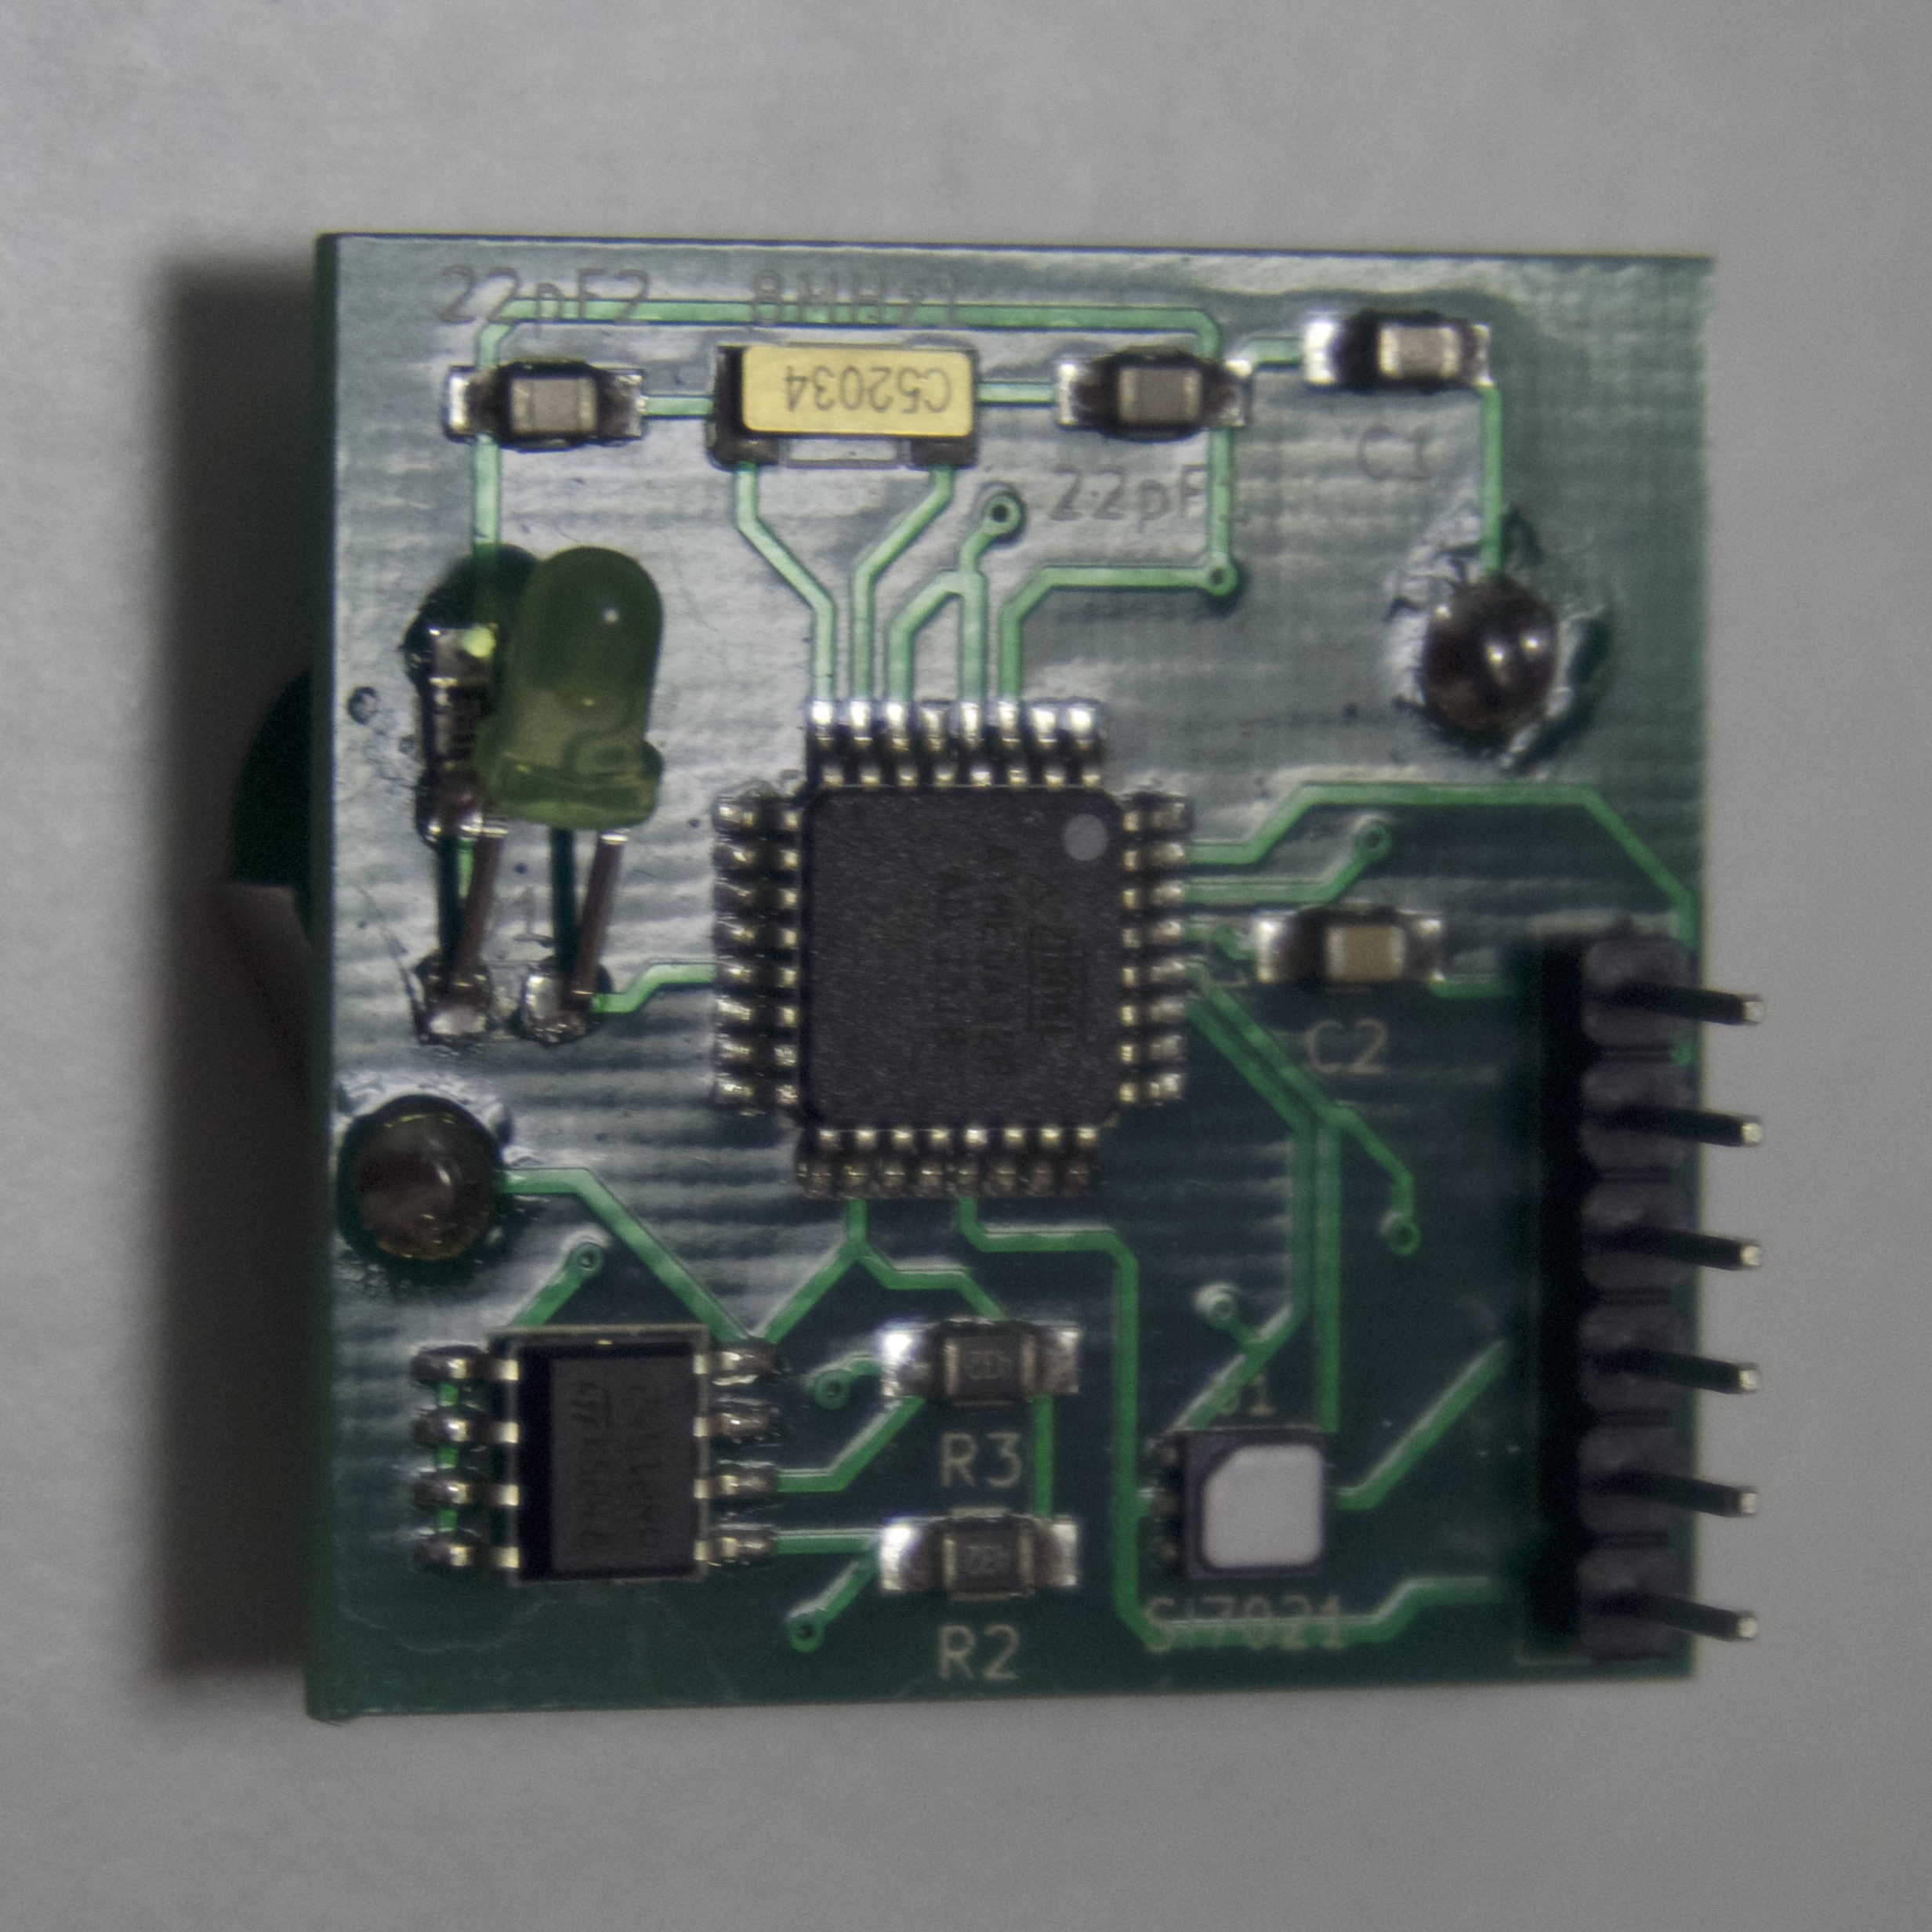 SMD Board Assembled (Front)